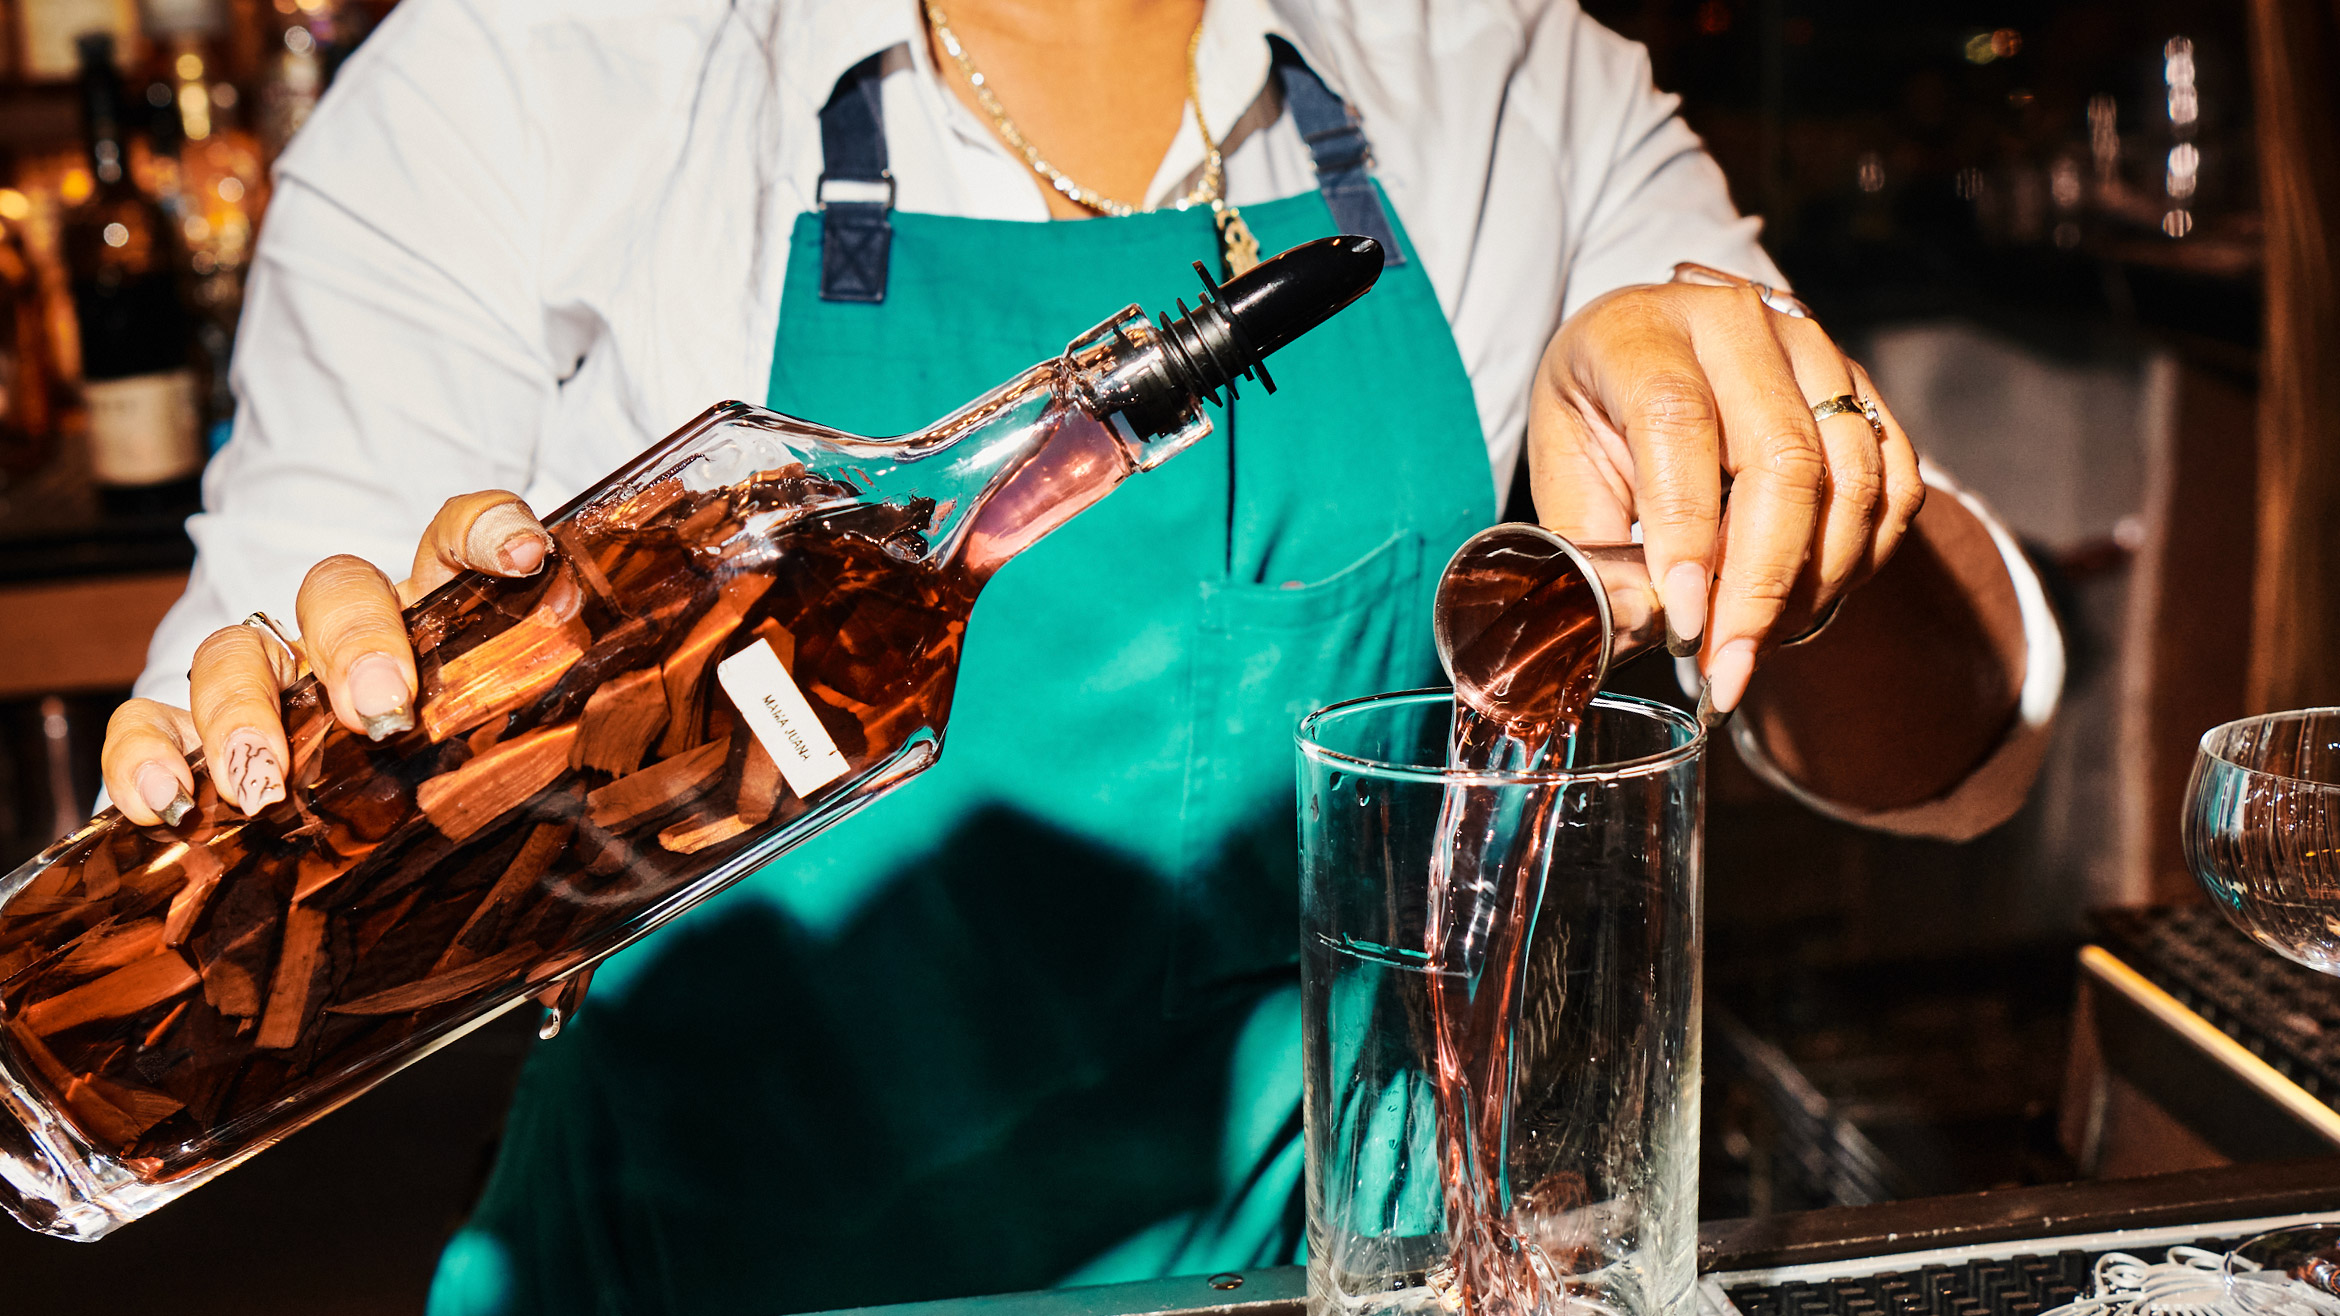 A bartender pours a jigger of liquid into a glass, in the other hand they hold a bottle filled with a brown liquor and botanicals.